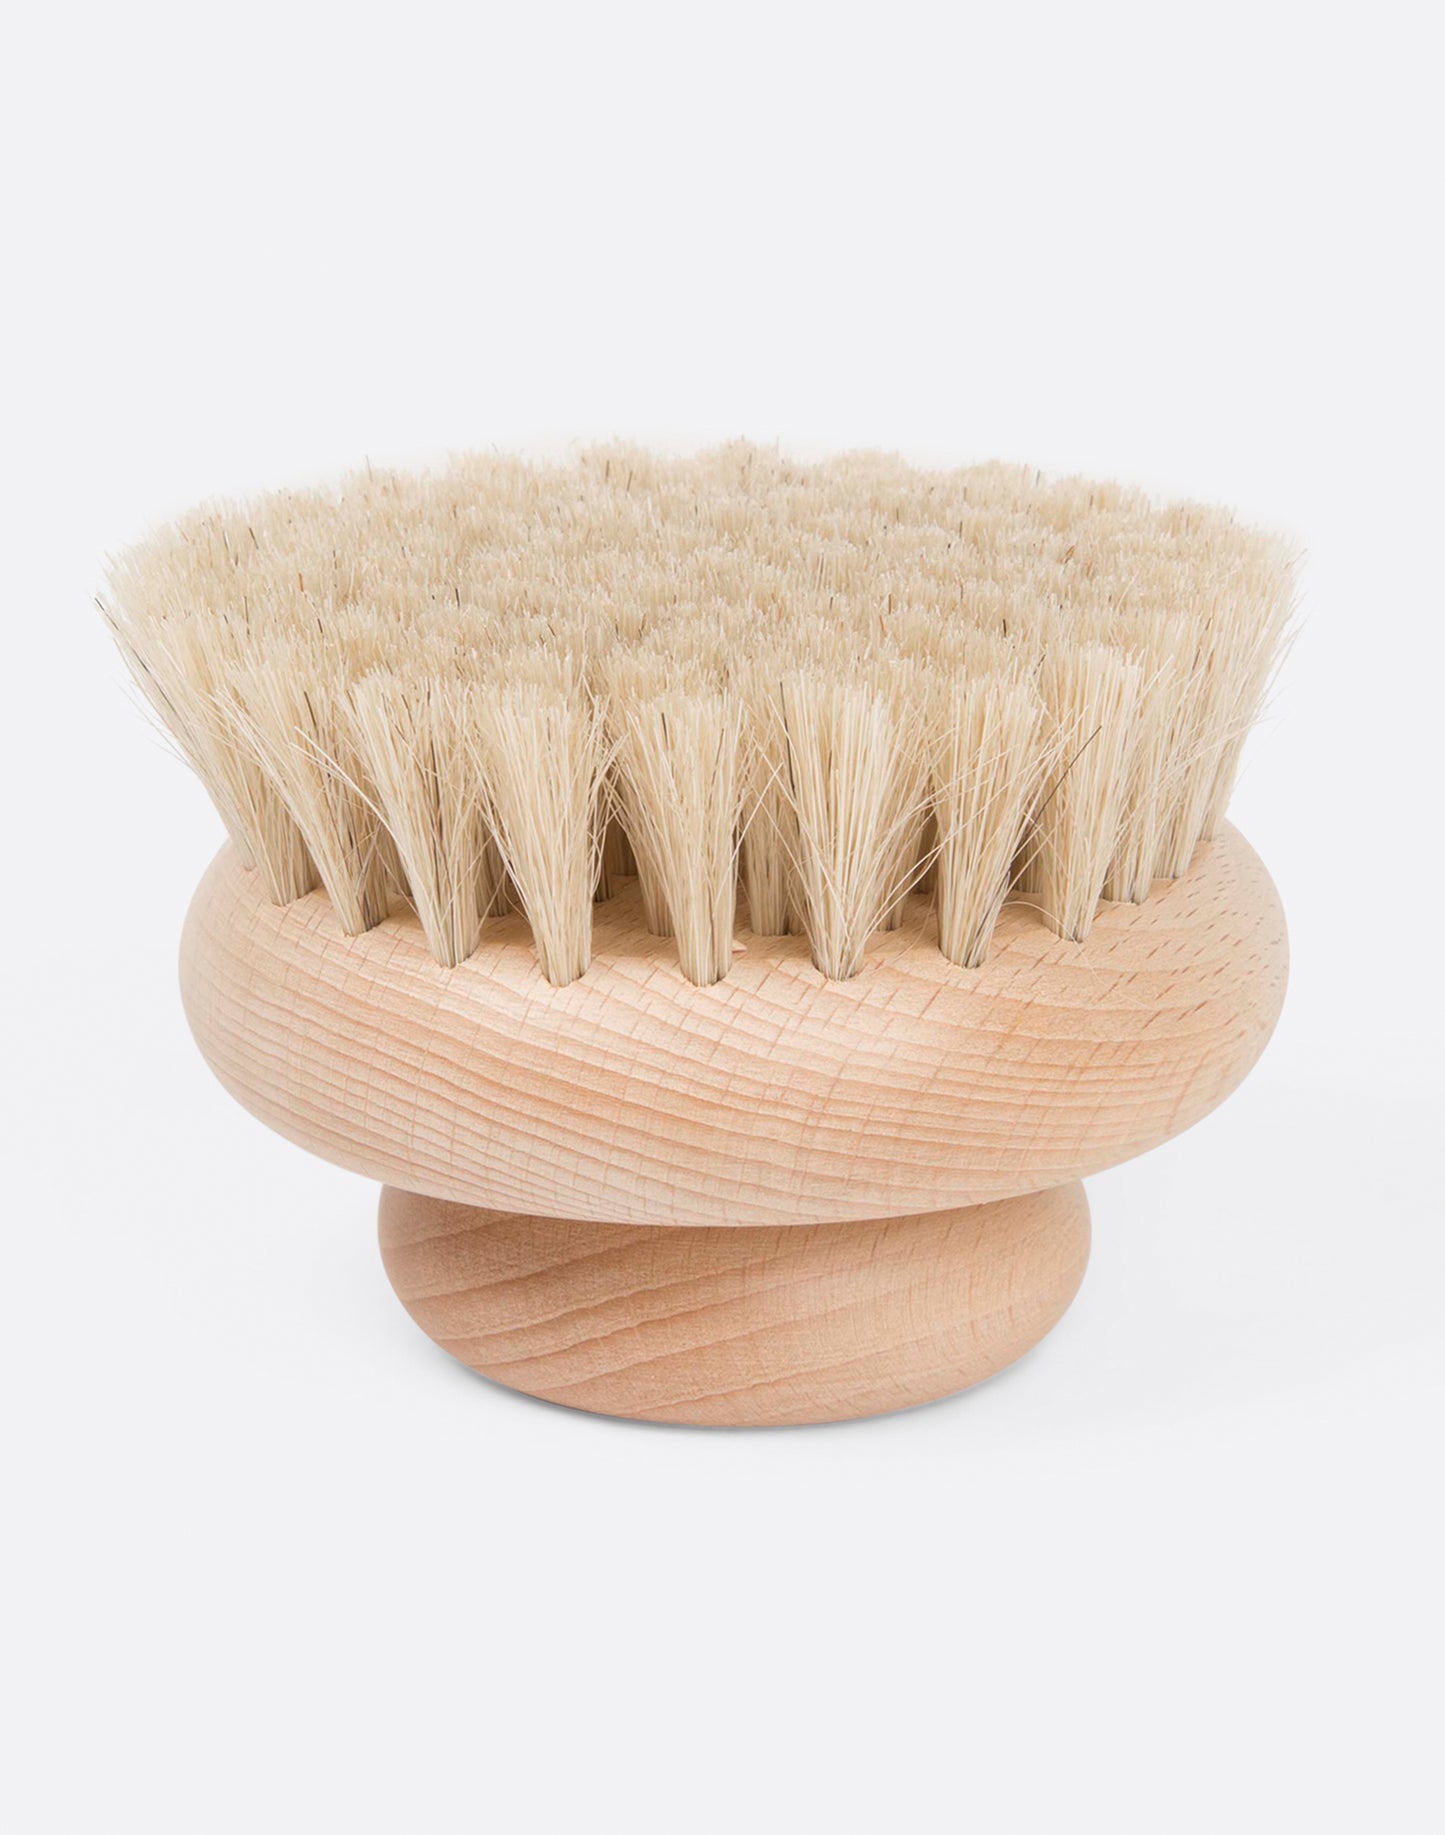 Round beechwood dry brush, shown with the bristle-side facing up.